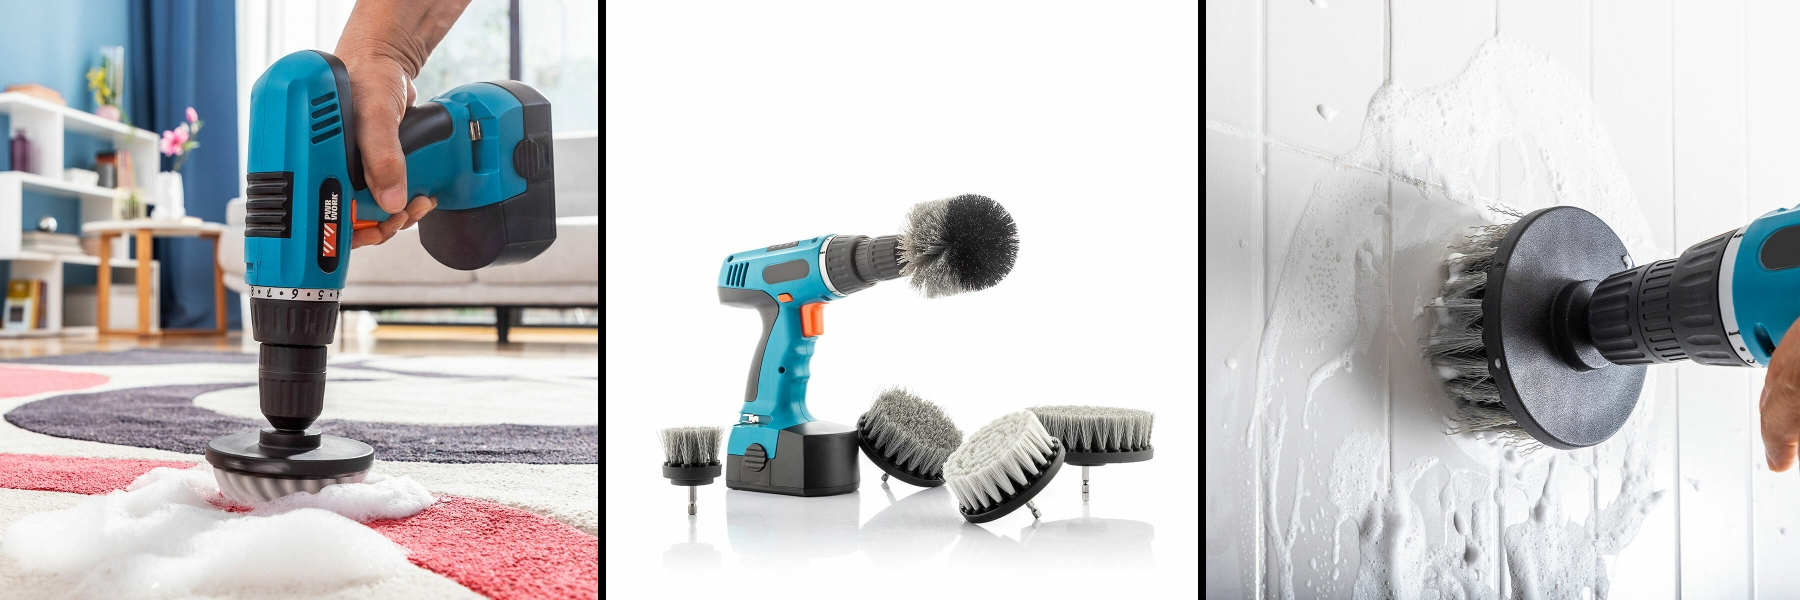 https://grooptoo.ch/media/catalog/product/b/a/banner-brosses_de_nettoyage_pour_perceuse_5_unit_s.jpg